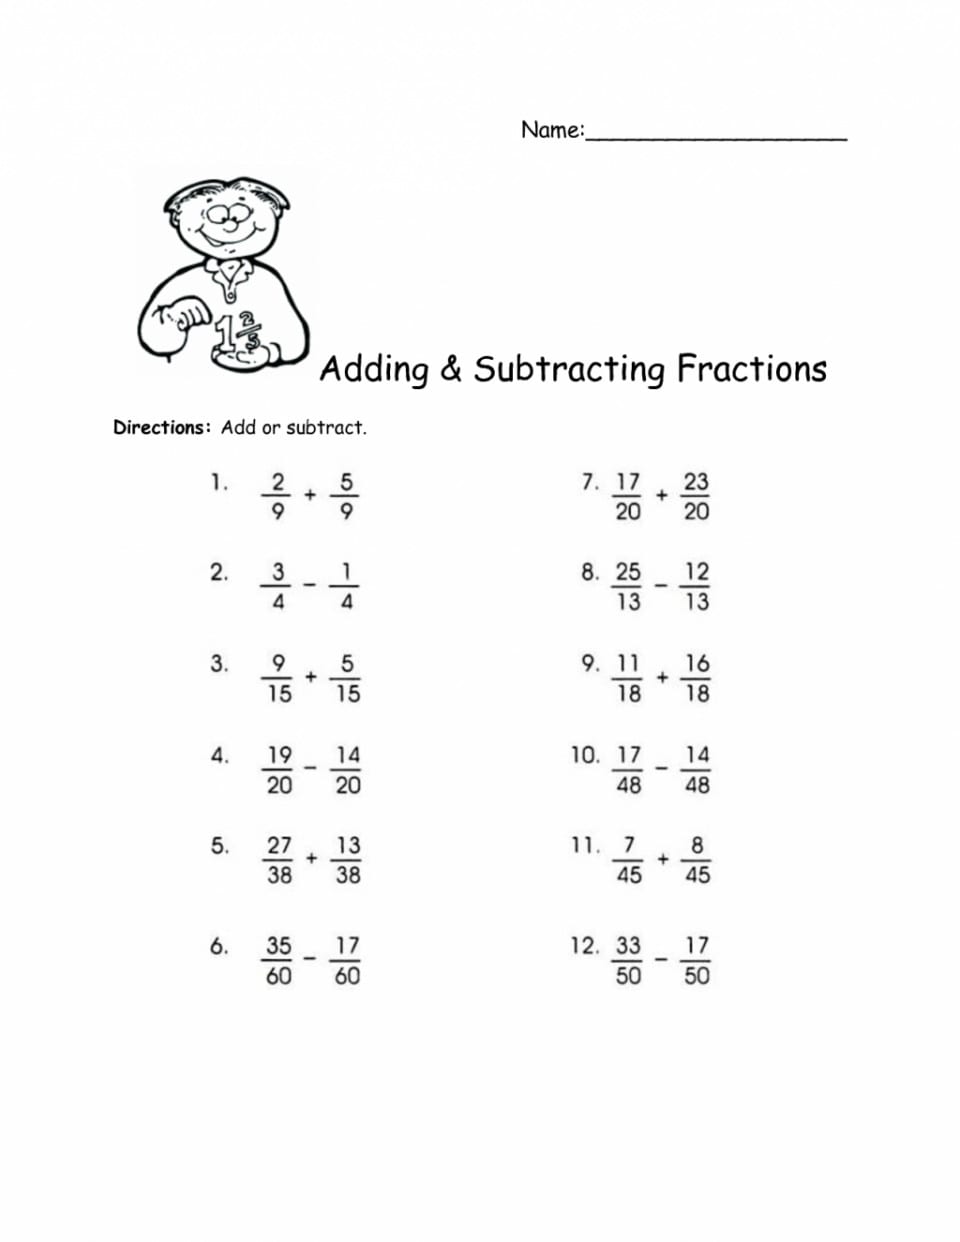 adding-subtracting-multiplying-and-dividing-fractions-worksheet